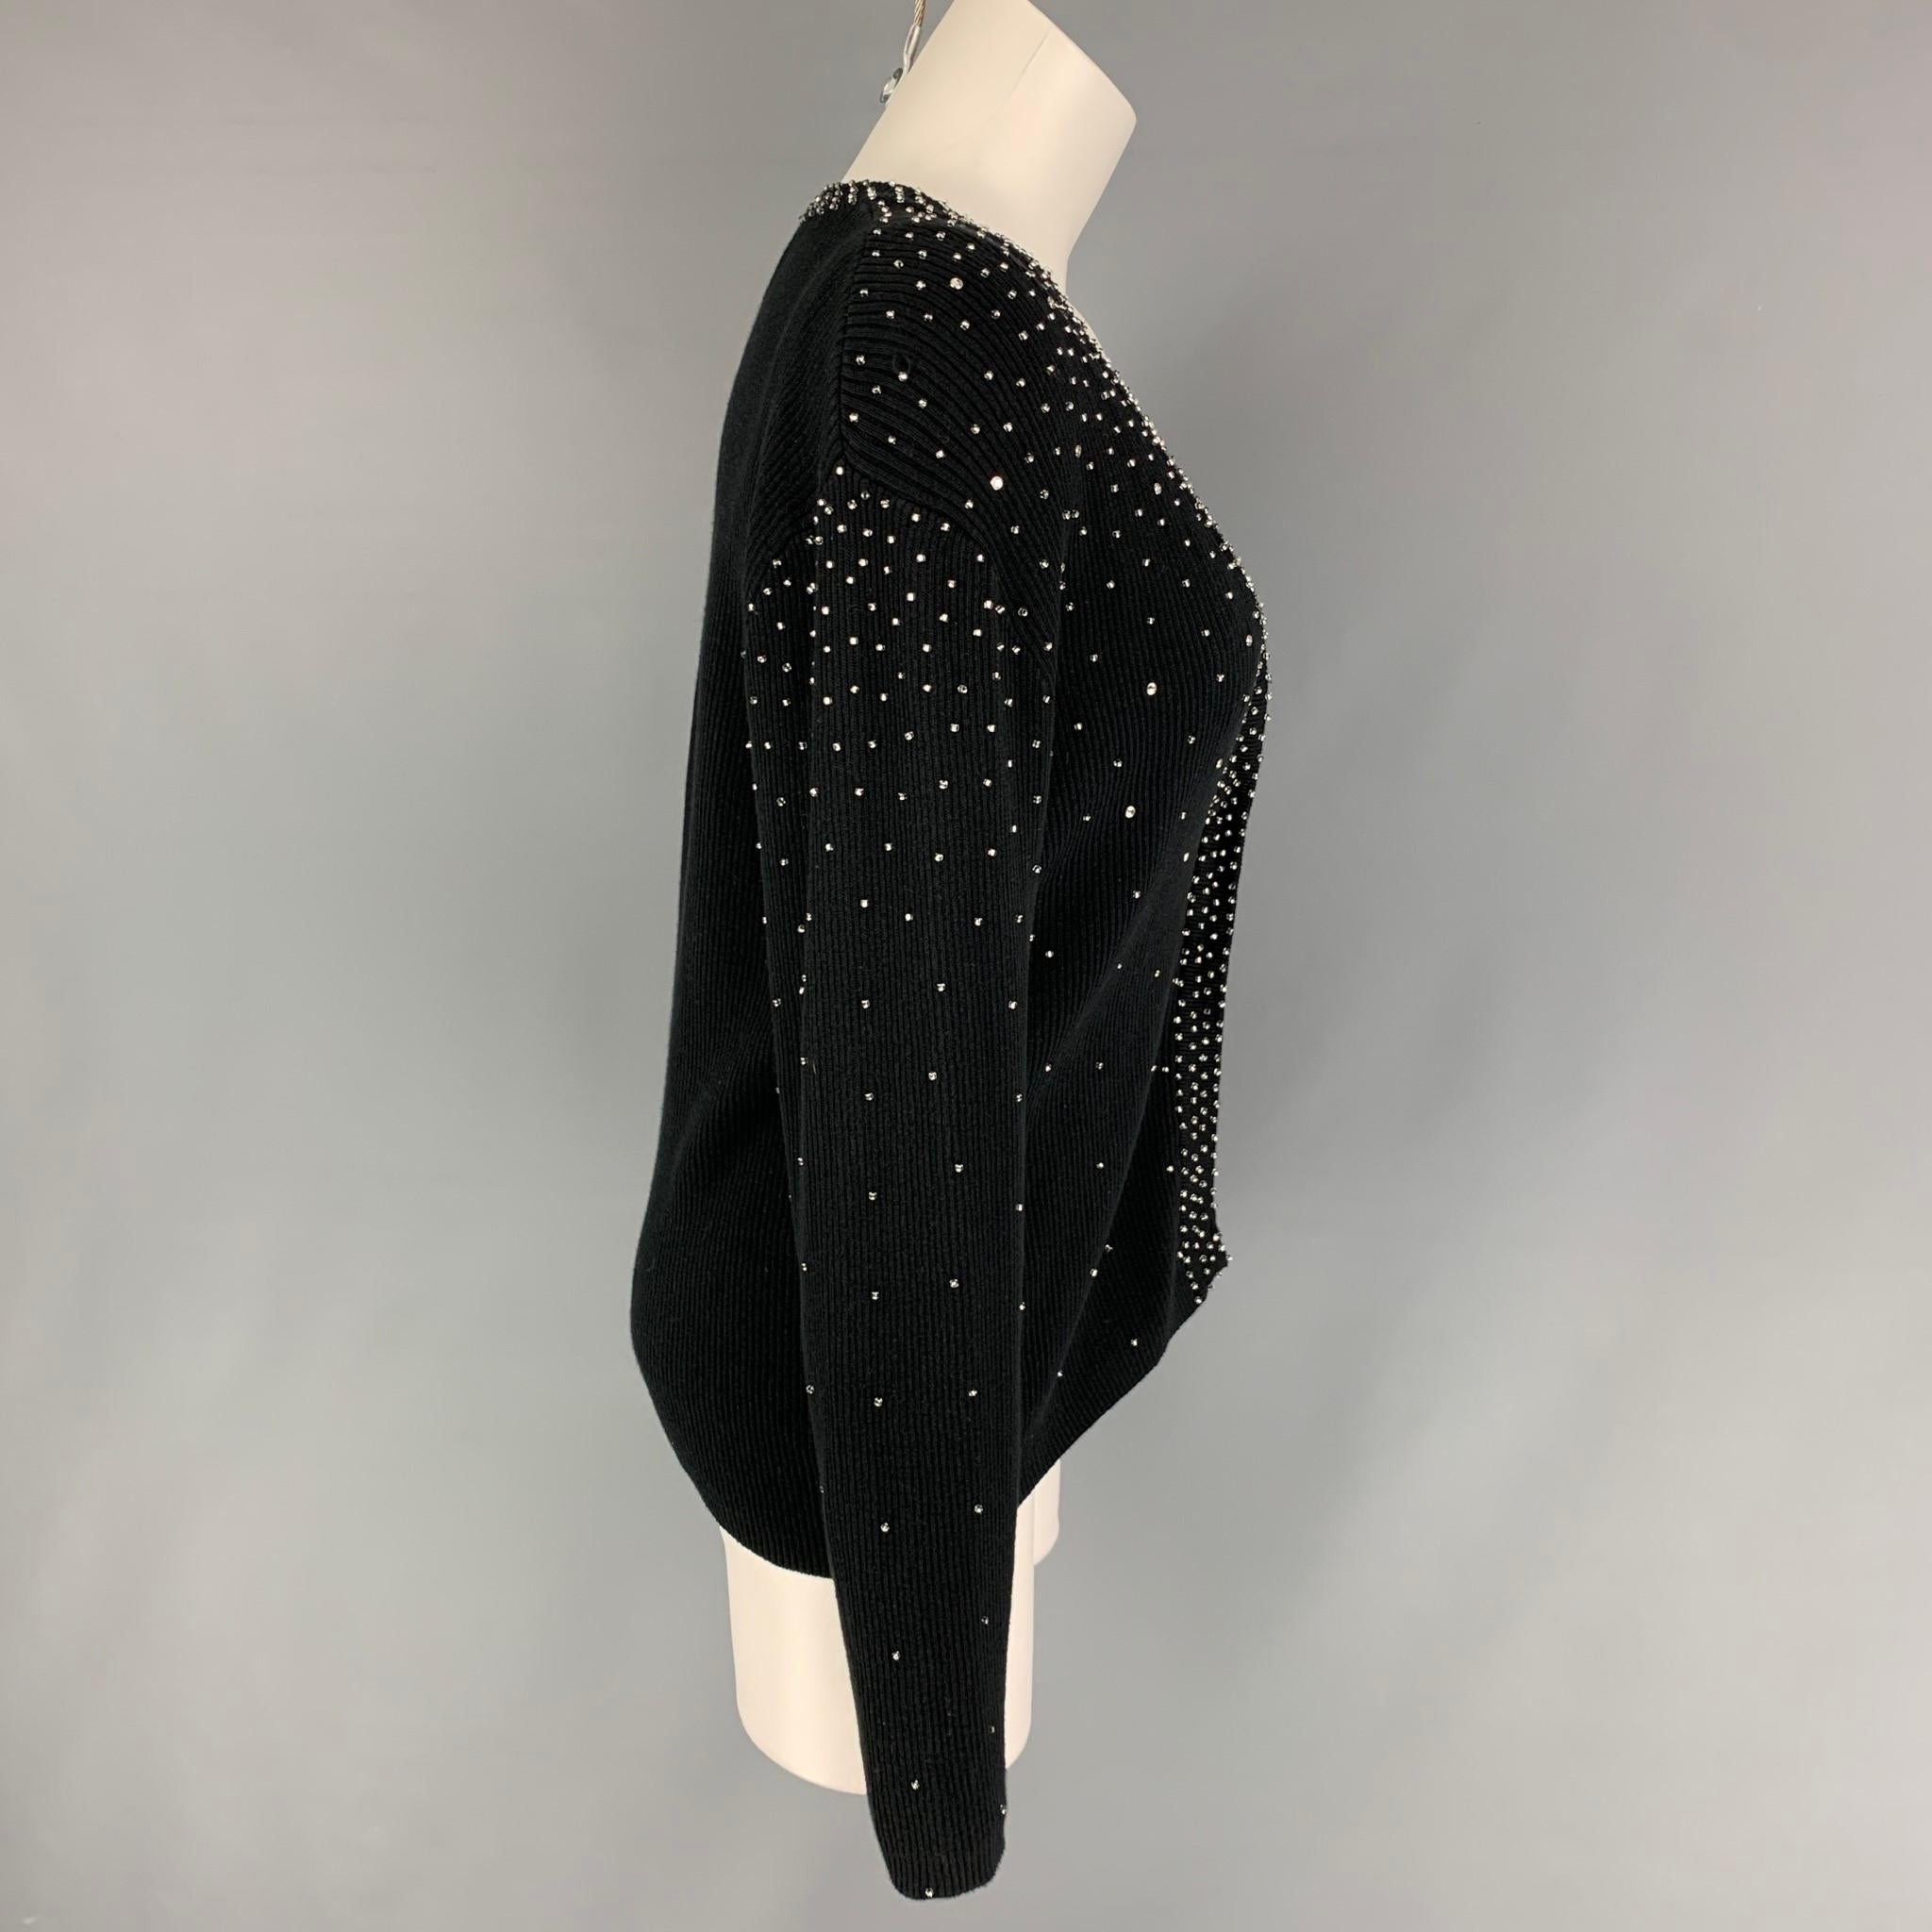 BOB MACKIE 2 Piece cardigan set comes in a black cotton featuring rhinestones, buttoned closure, and a matching camisole. 

Very Good Pre-Owned Condition.
Marked: L

Measurements:

-Cardigan
Shoulder: 17 in/
Bust: 38 in.
Sleeve: 24.5 in.
Length: 23